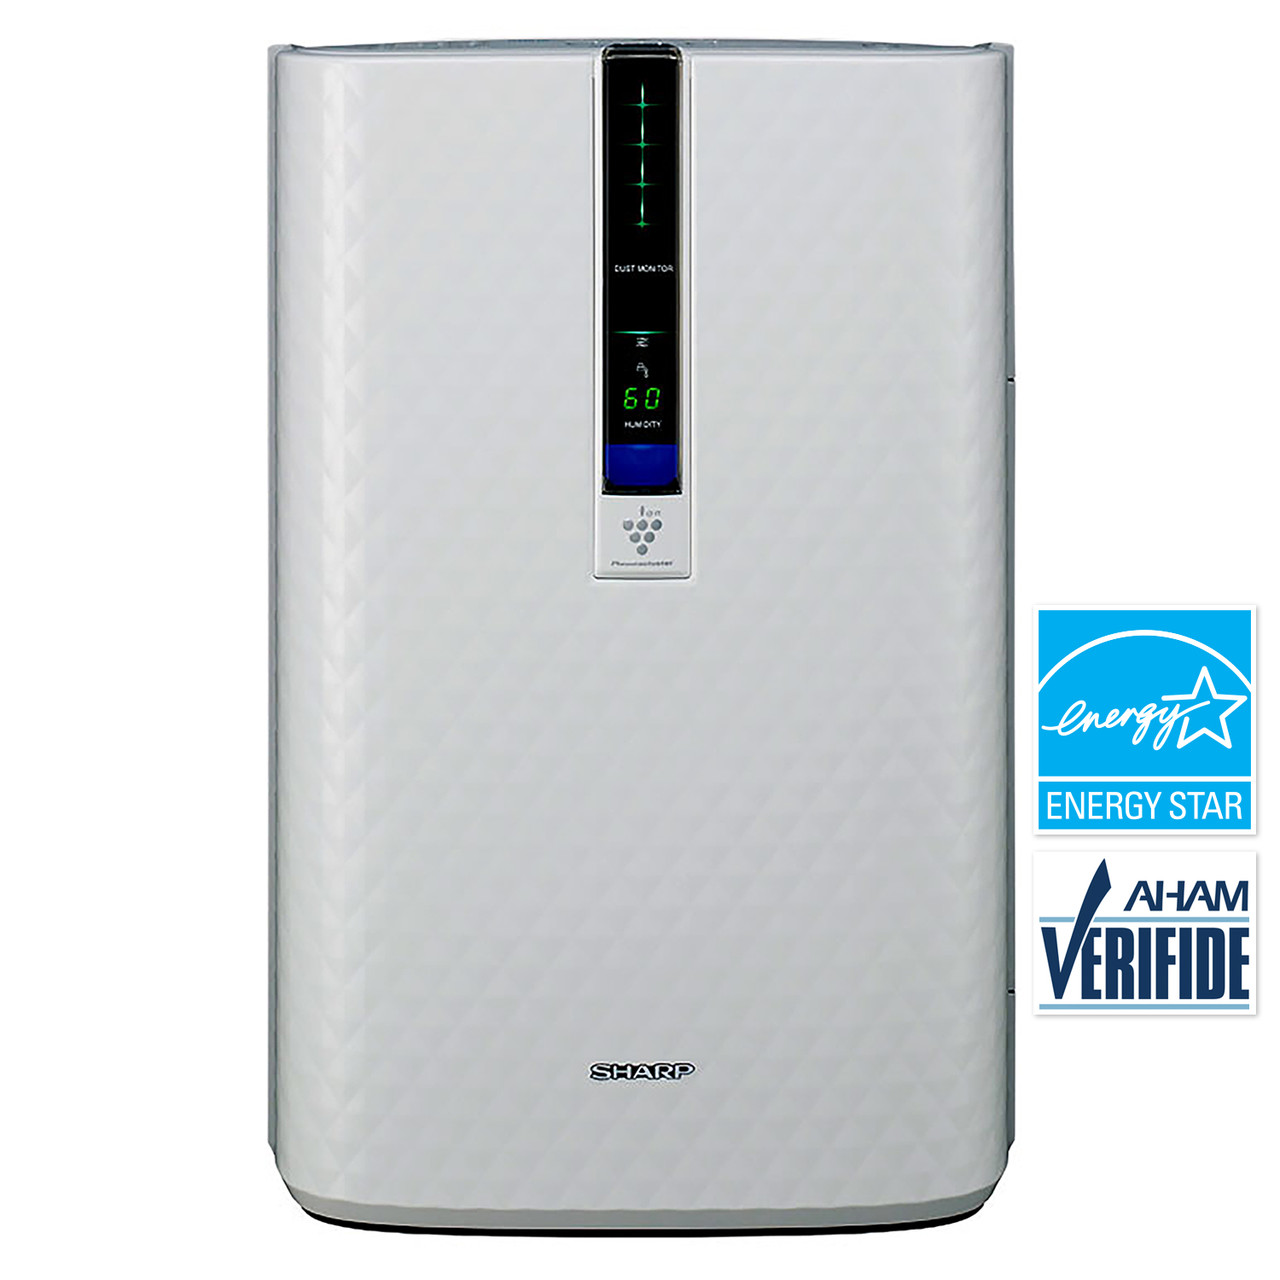 Sharp Plasmacluster® Air Purifier with Humidifying Function for Medium Rooms (KC850U)